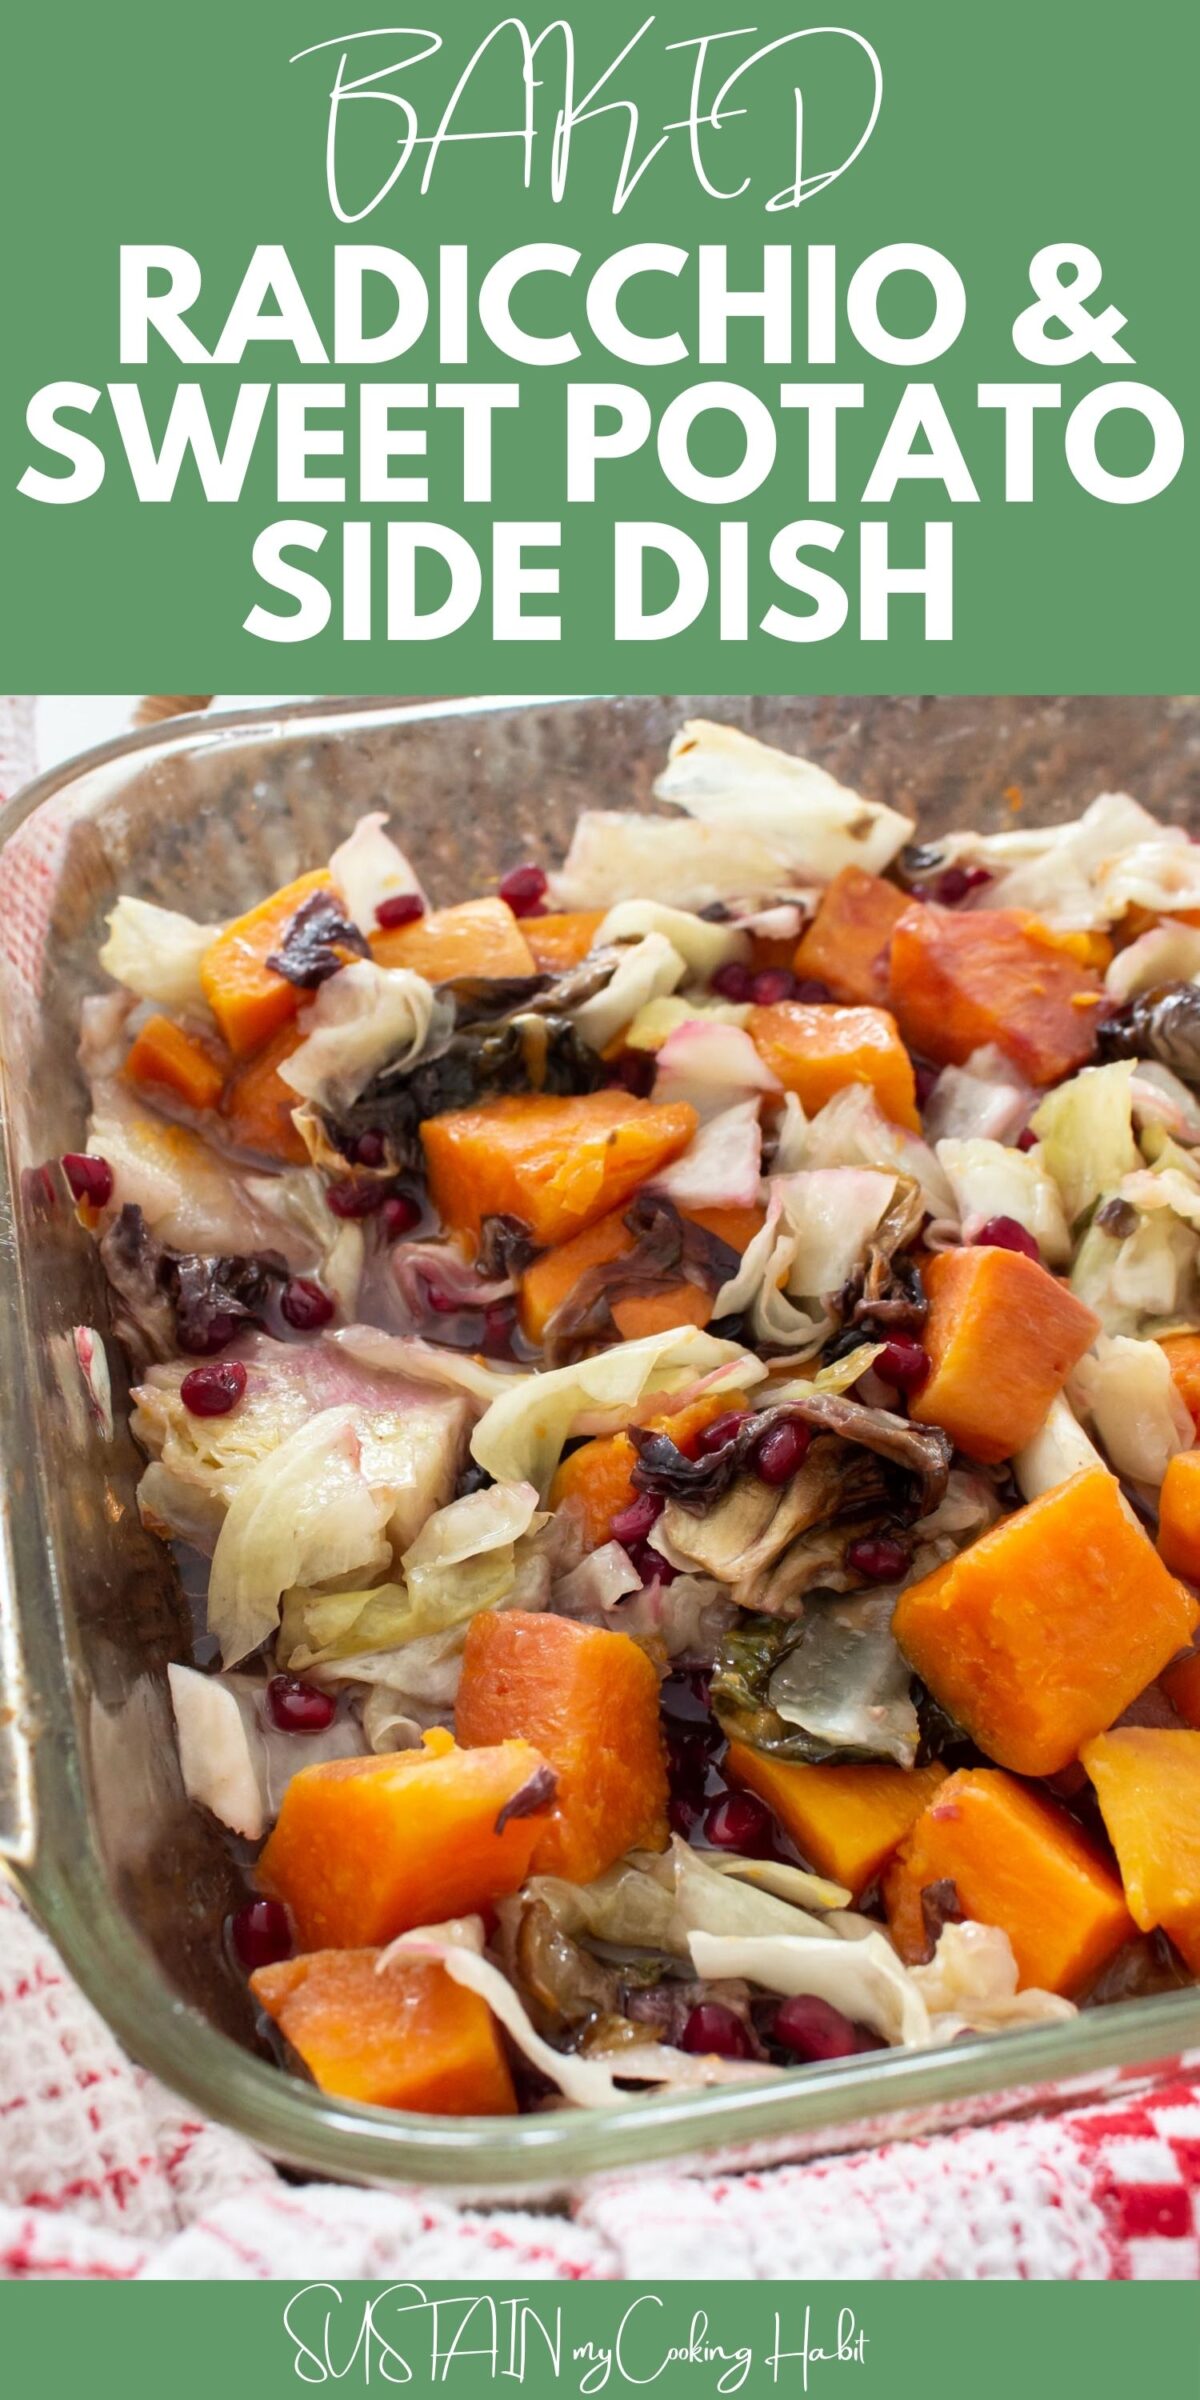 Baked radicchio, sweet potato and cabbage in a baking dish with text overlay.